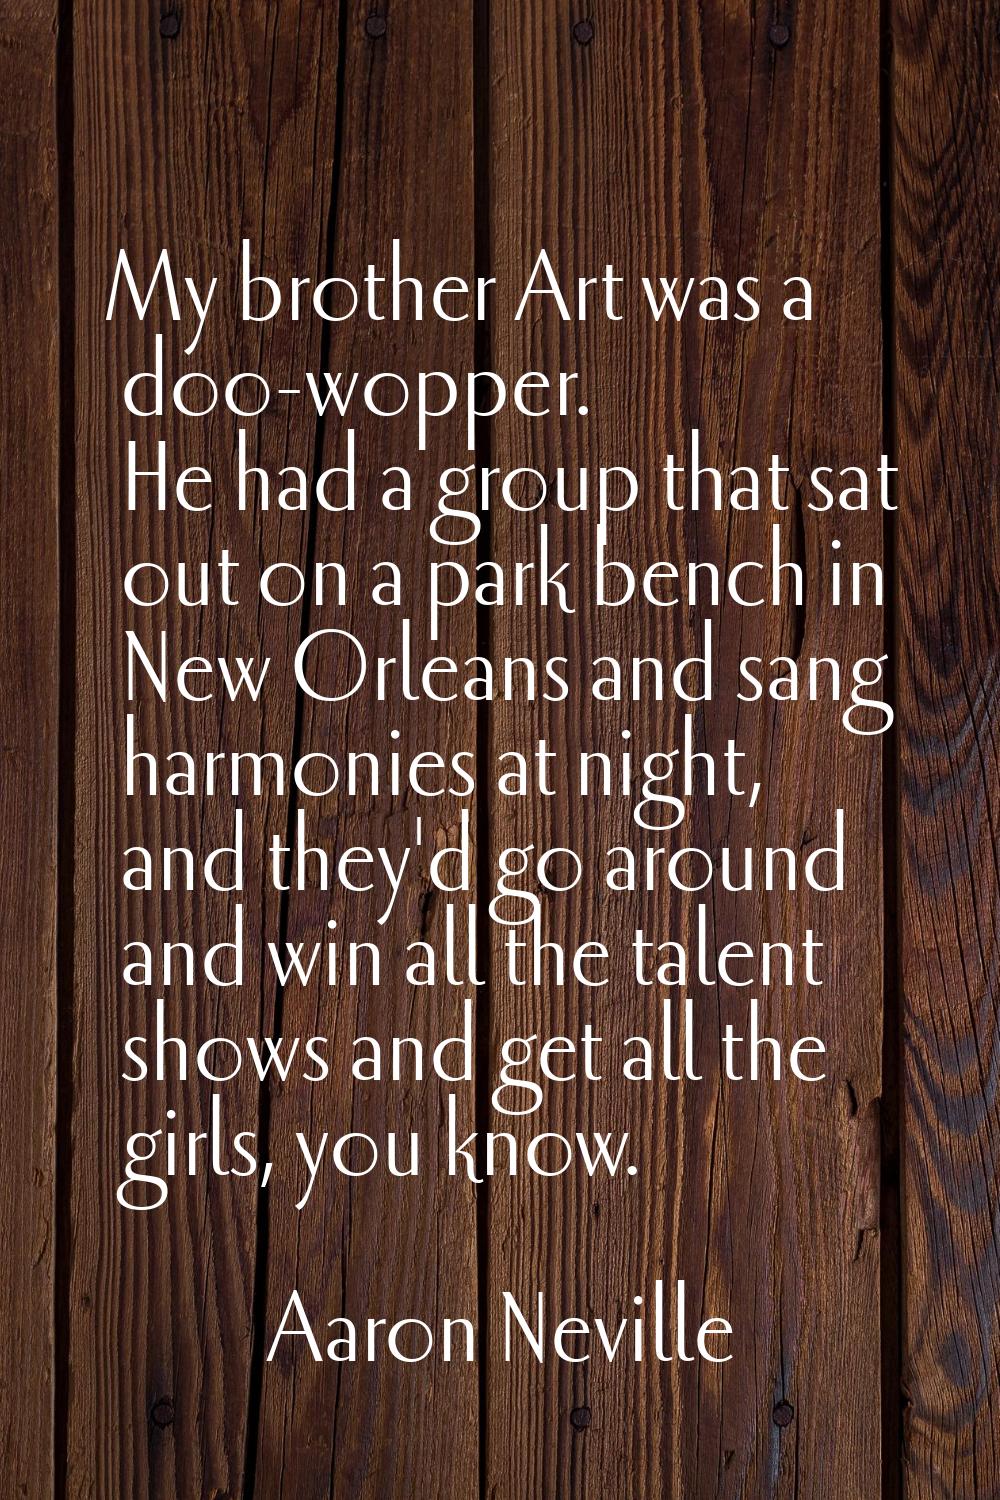 My brother Art was a doo-wopper. He had a group that sat out on a park bench in New Orleans and san